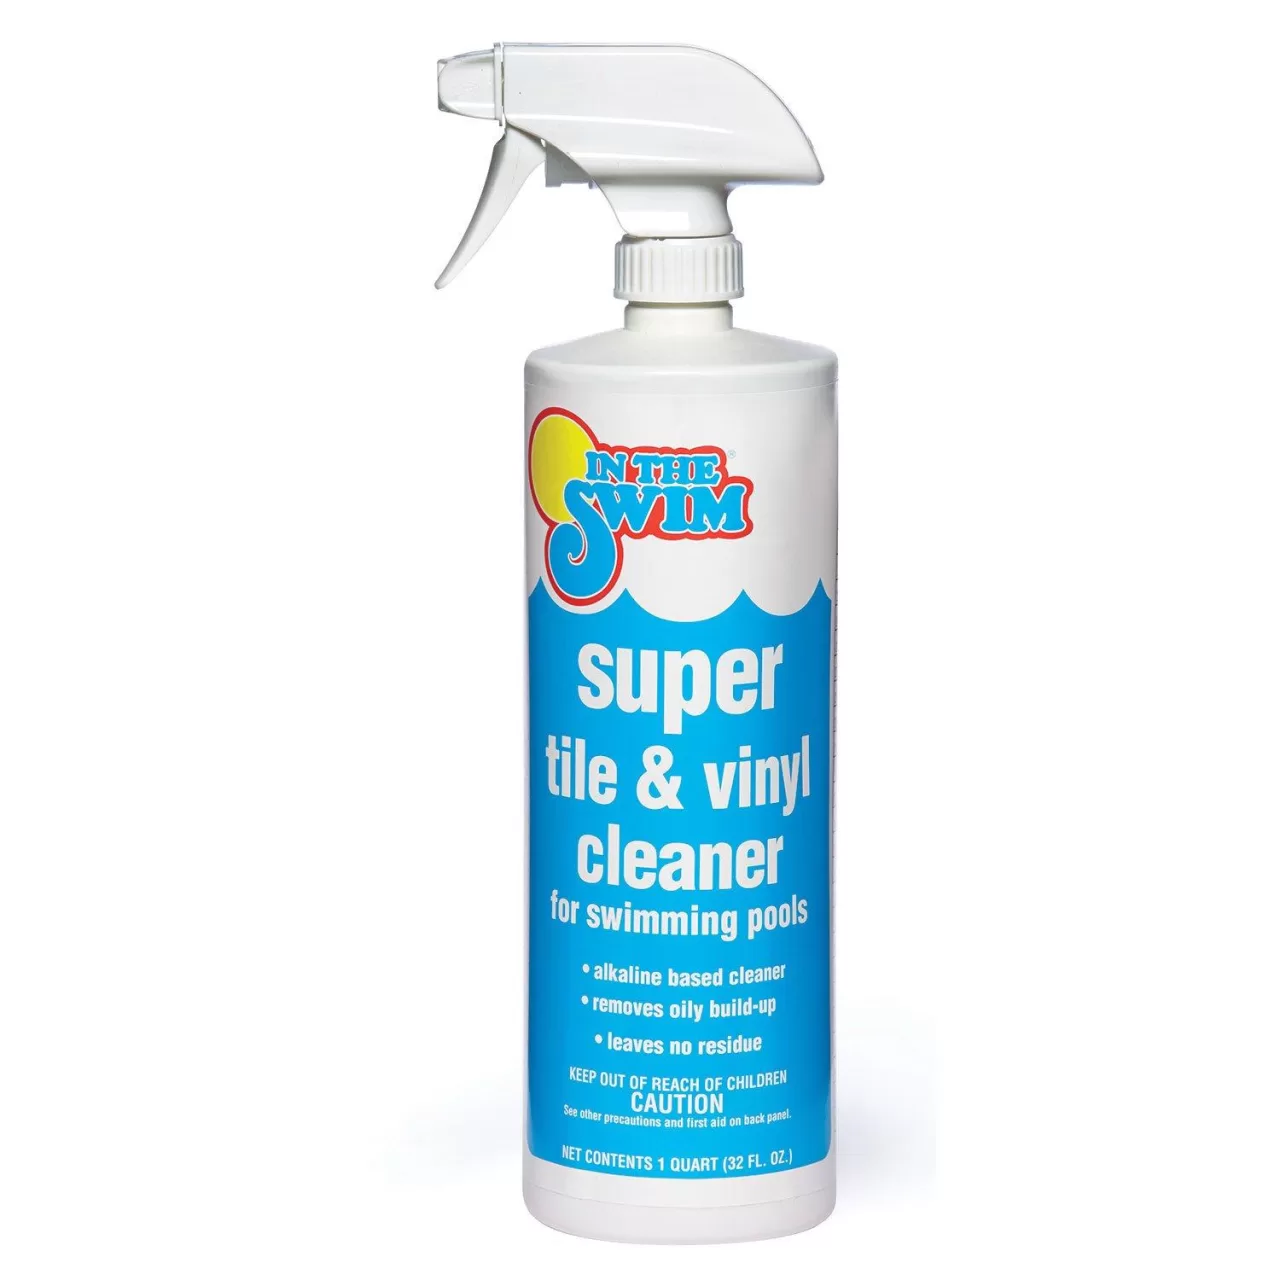 In the Swim's super tile and vinyl cleaner